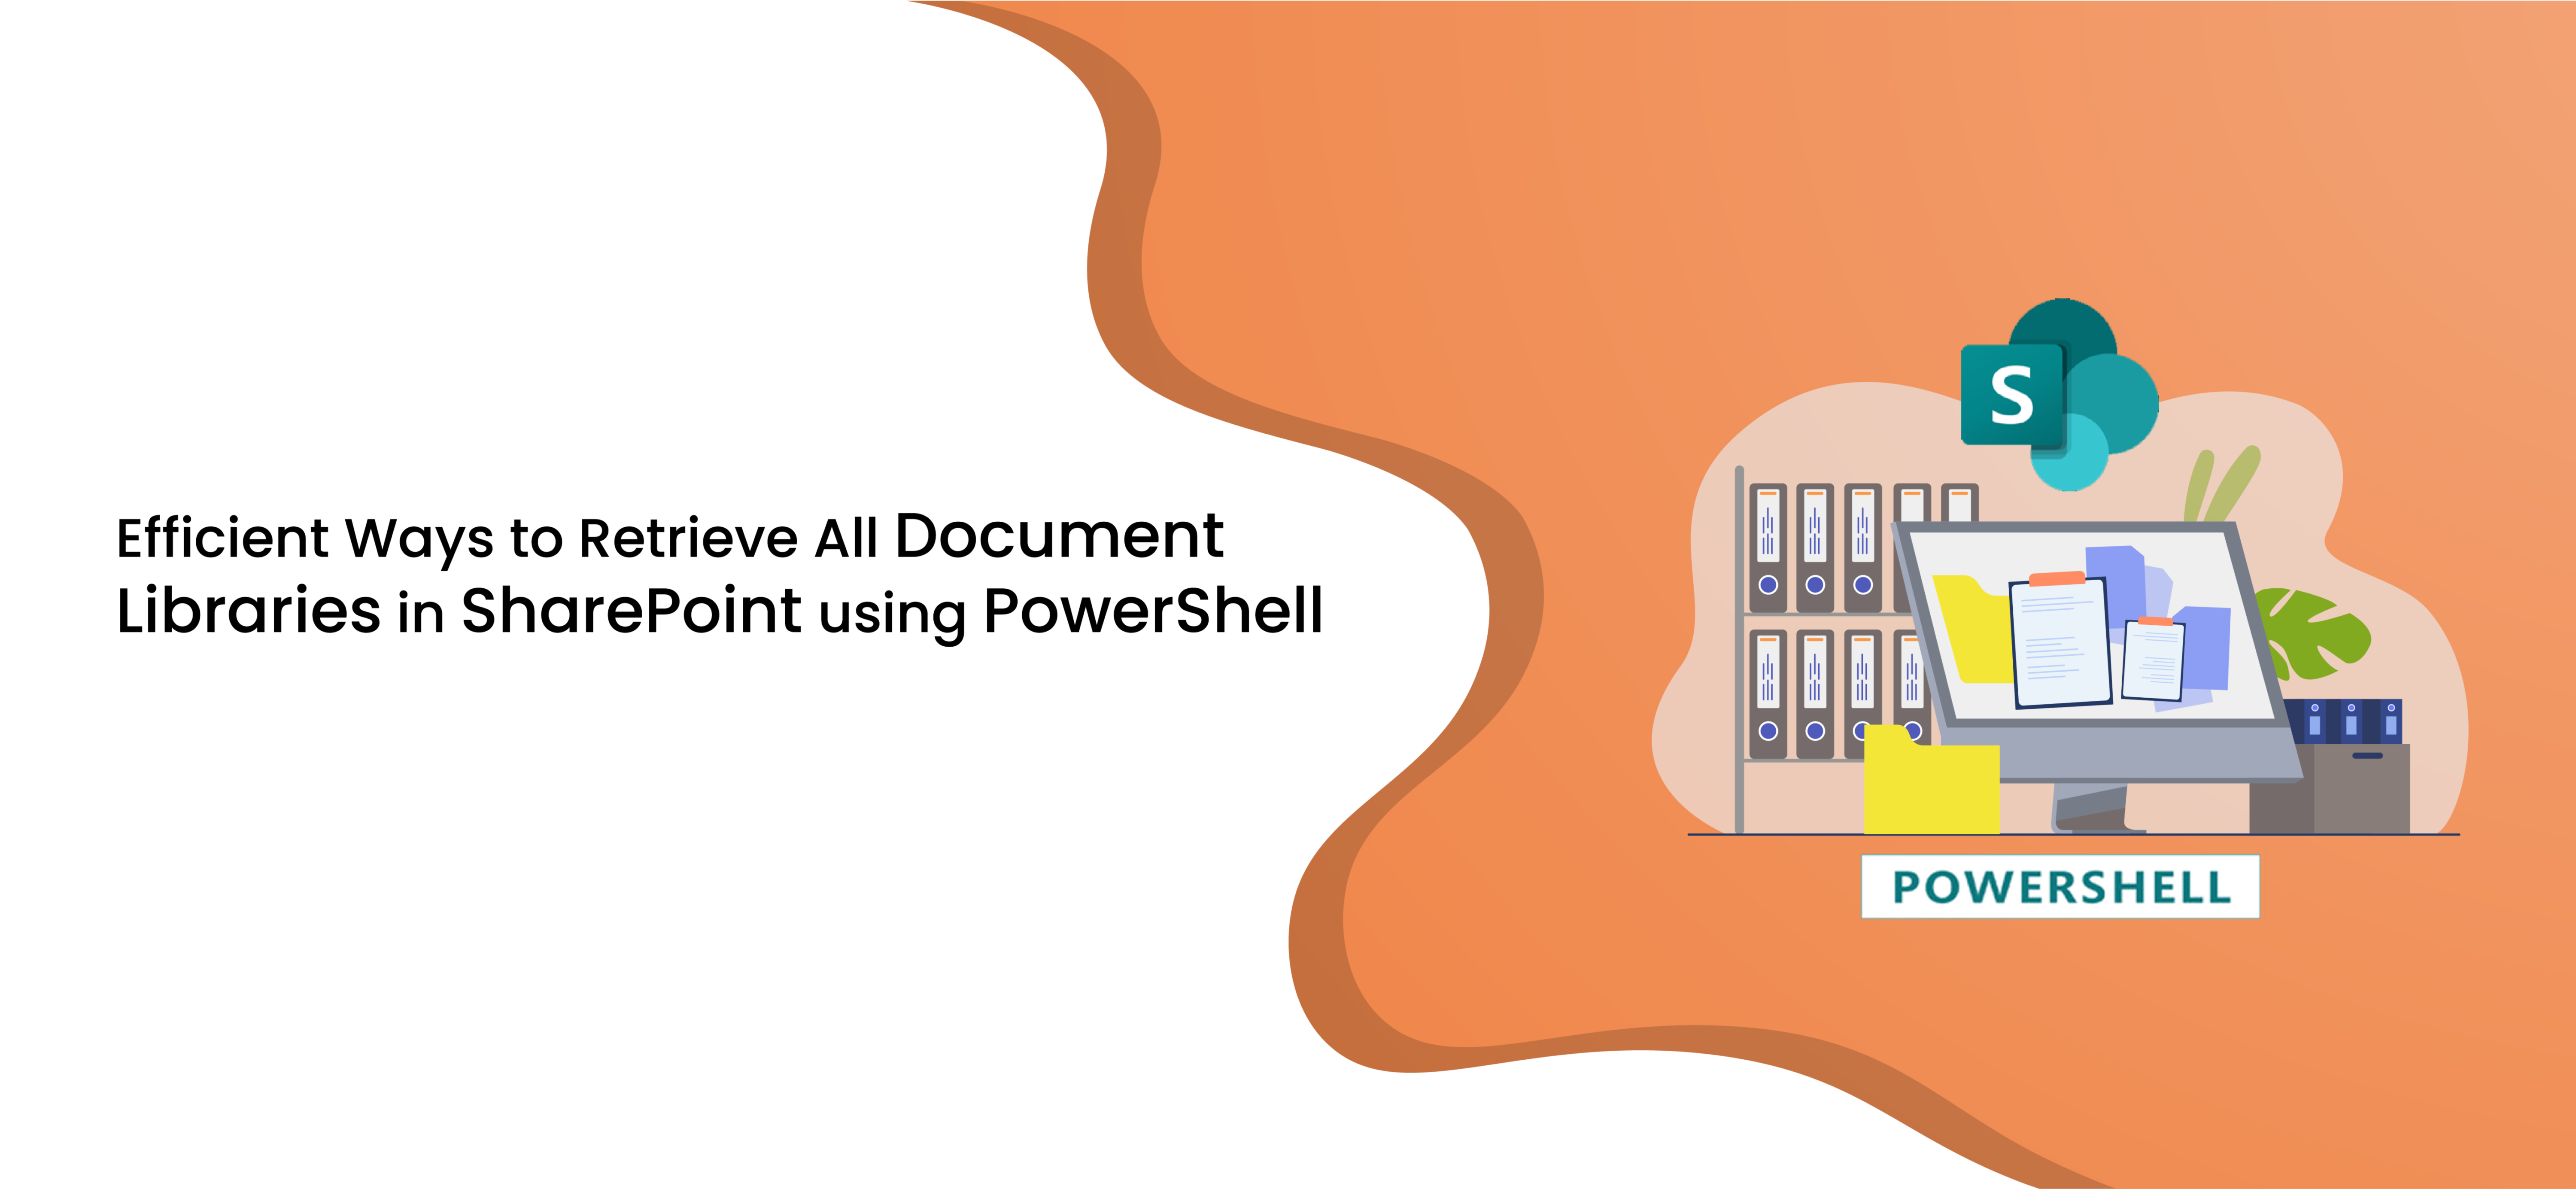 Efficient Ways to Retrieve All Document Libraries in SharePoint using PowerShell